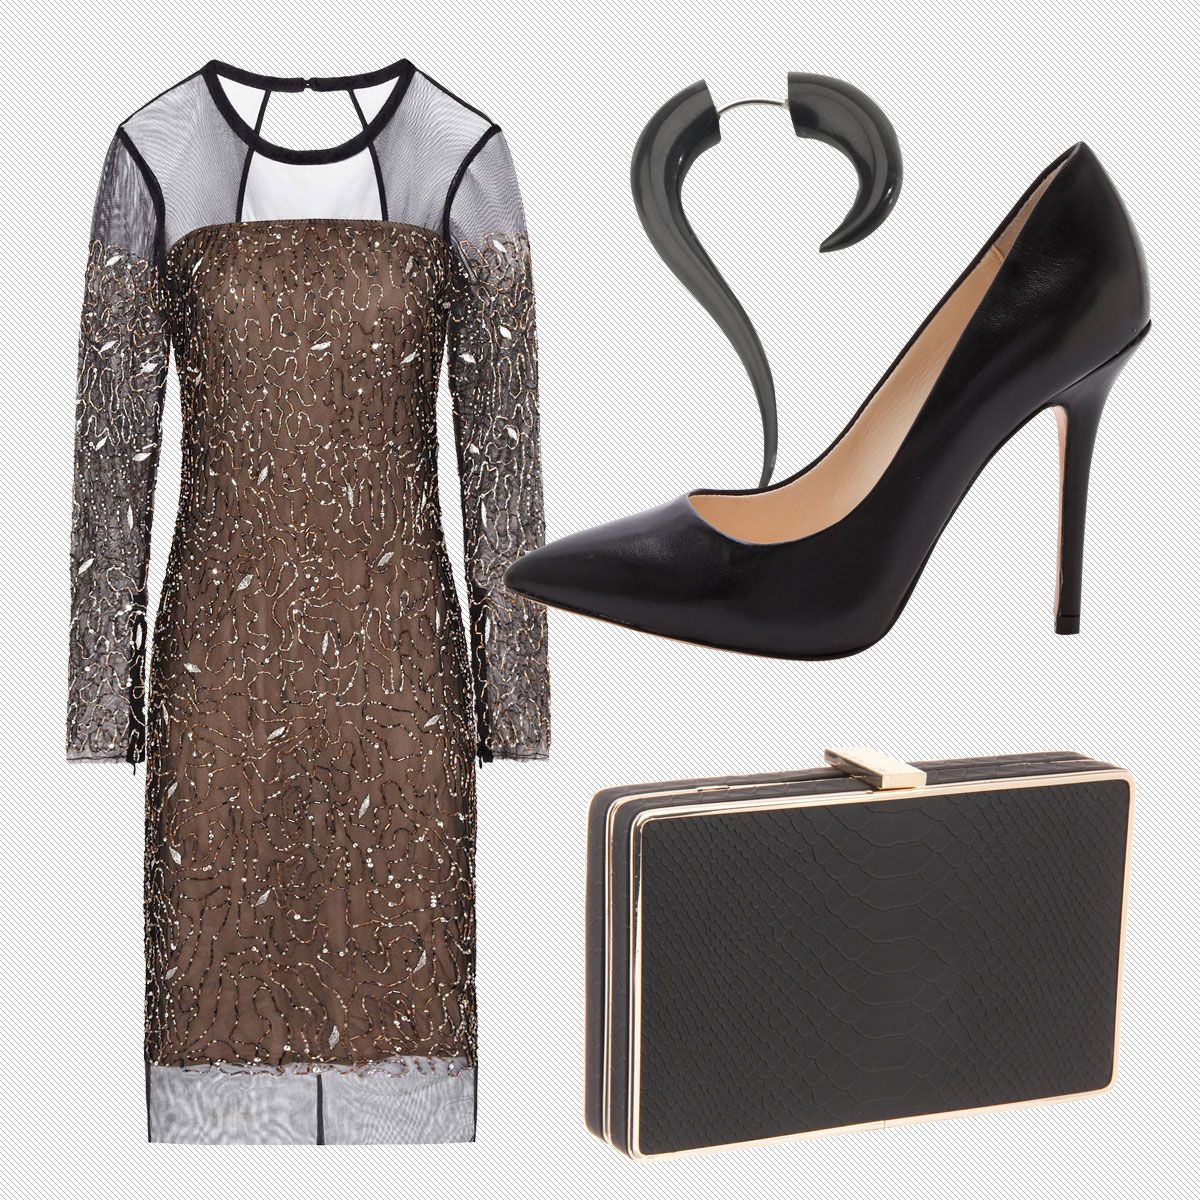 End the Year Lavishly in These Eight Evening Looks